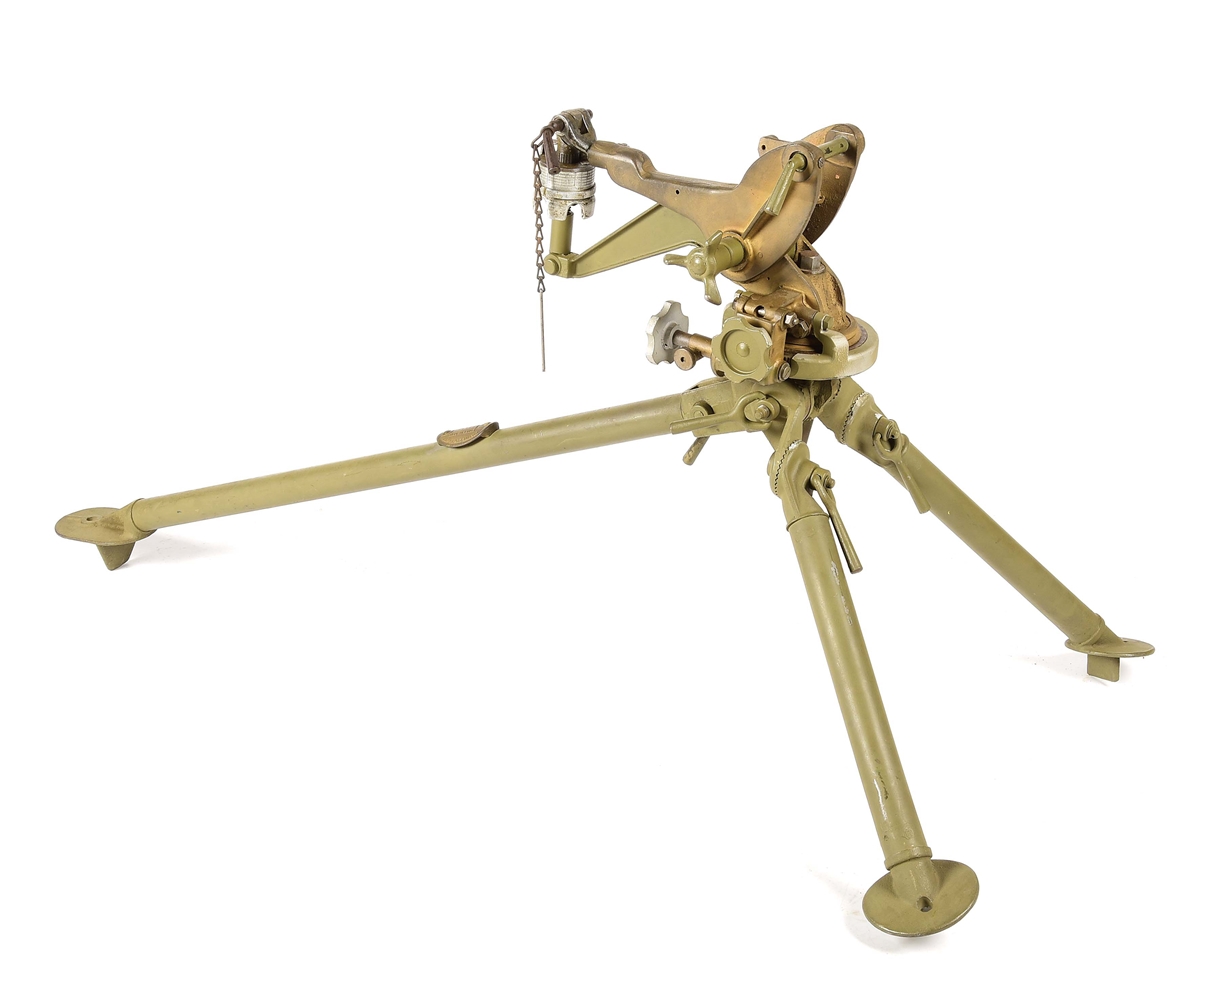 SCARCE AND COLLECTIBLE VERY CLEAN WORLD WAR I ERA STANDARD EQUIPMENT COMPANY MODEL OF 1918 TRIPOD FOR BROWNING MACHINE GUN.